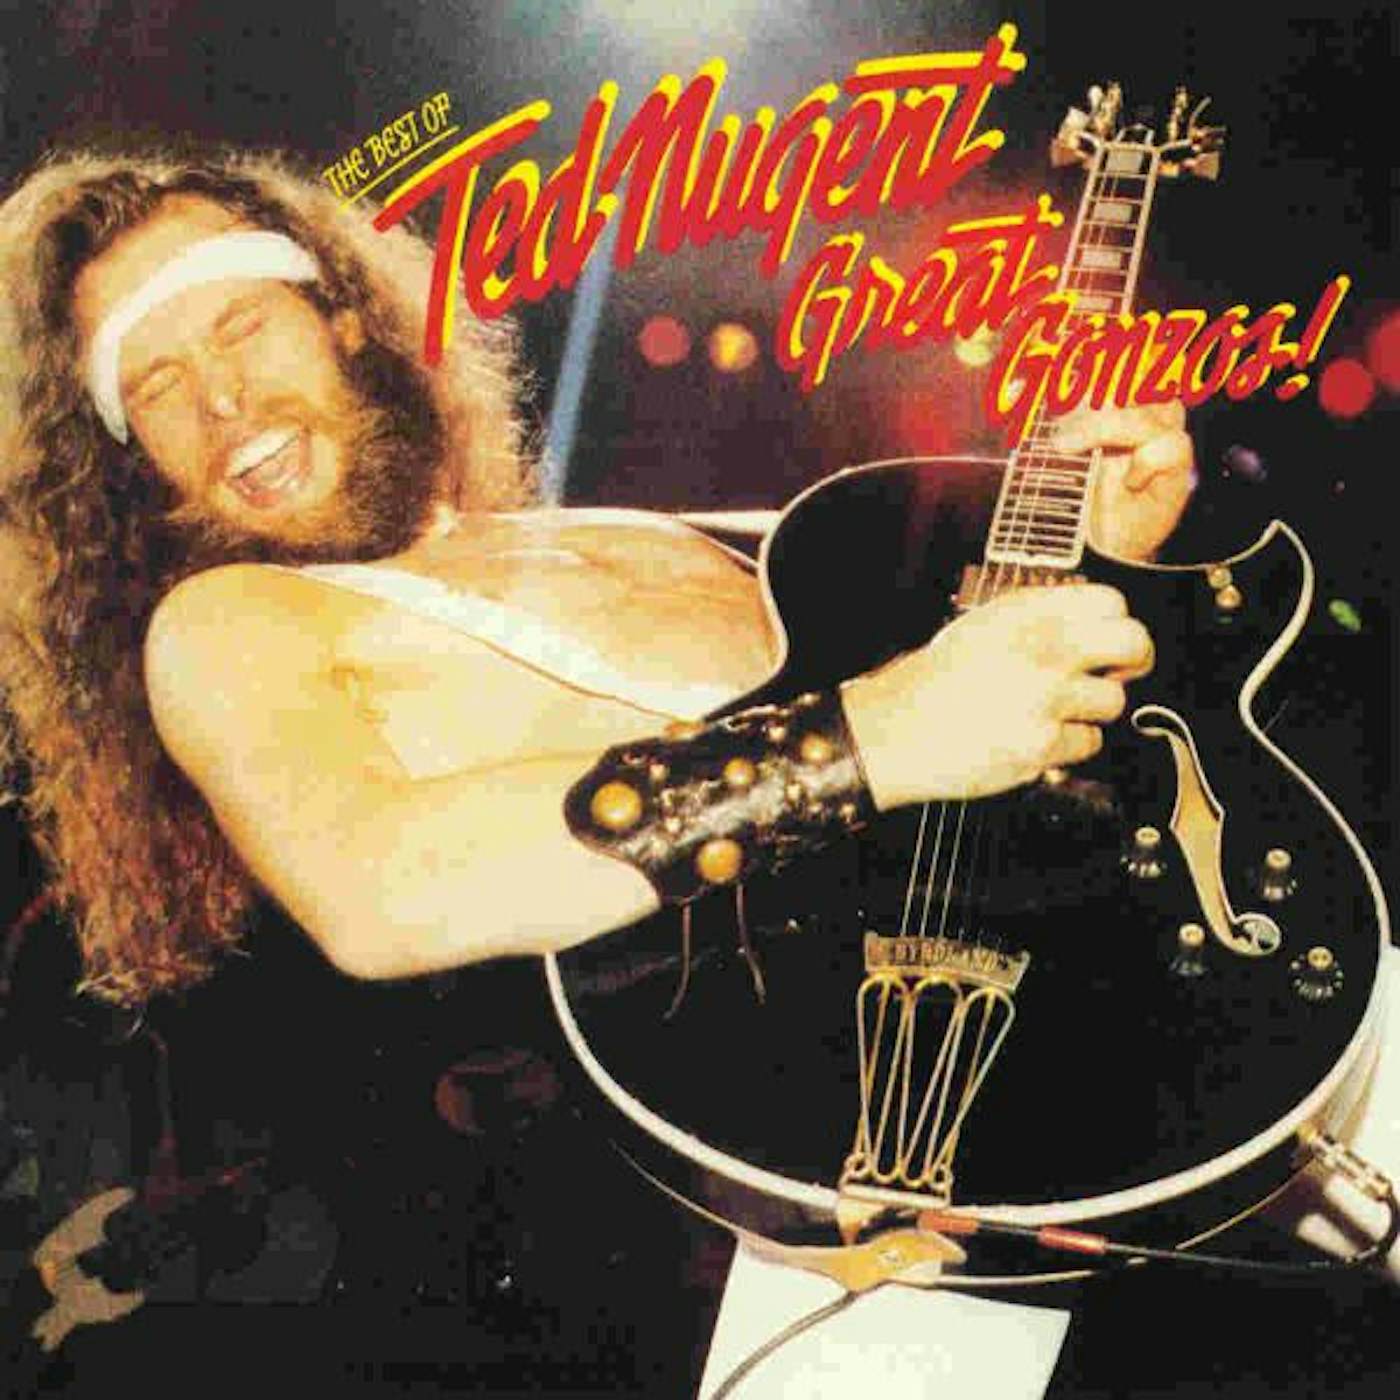 GREAT GONZOS: BEST OF TED NUGENT CD